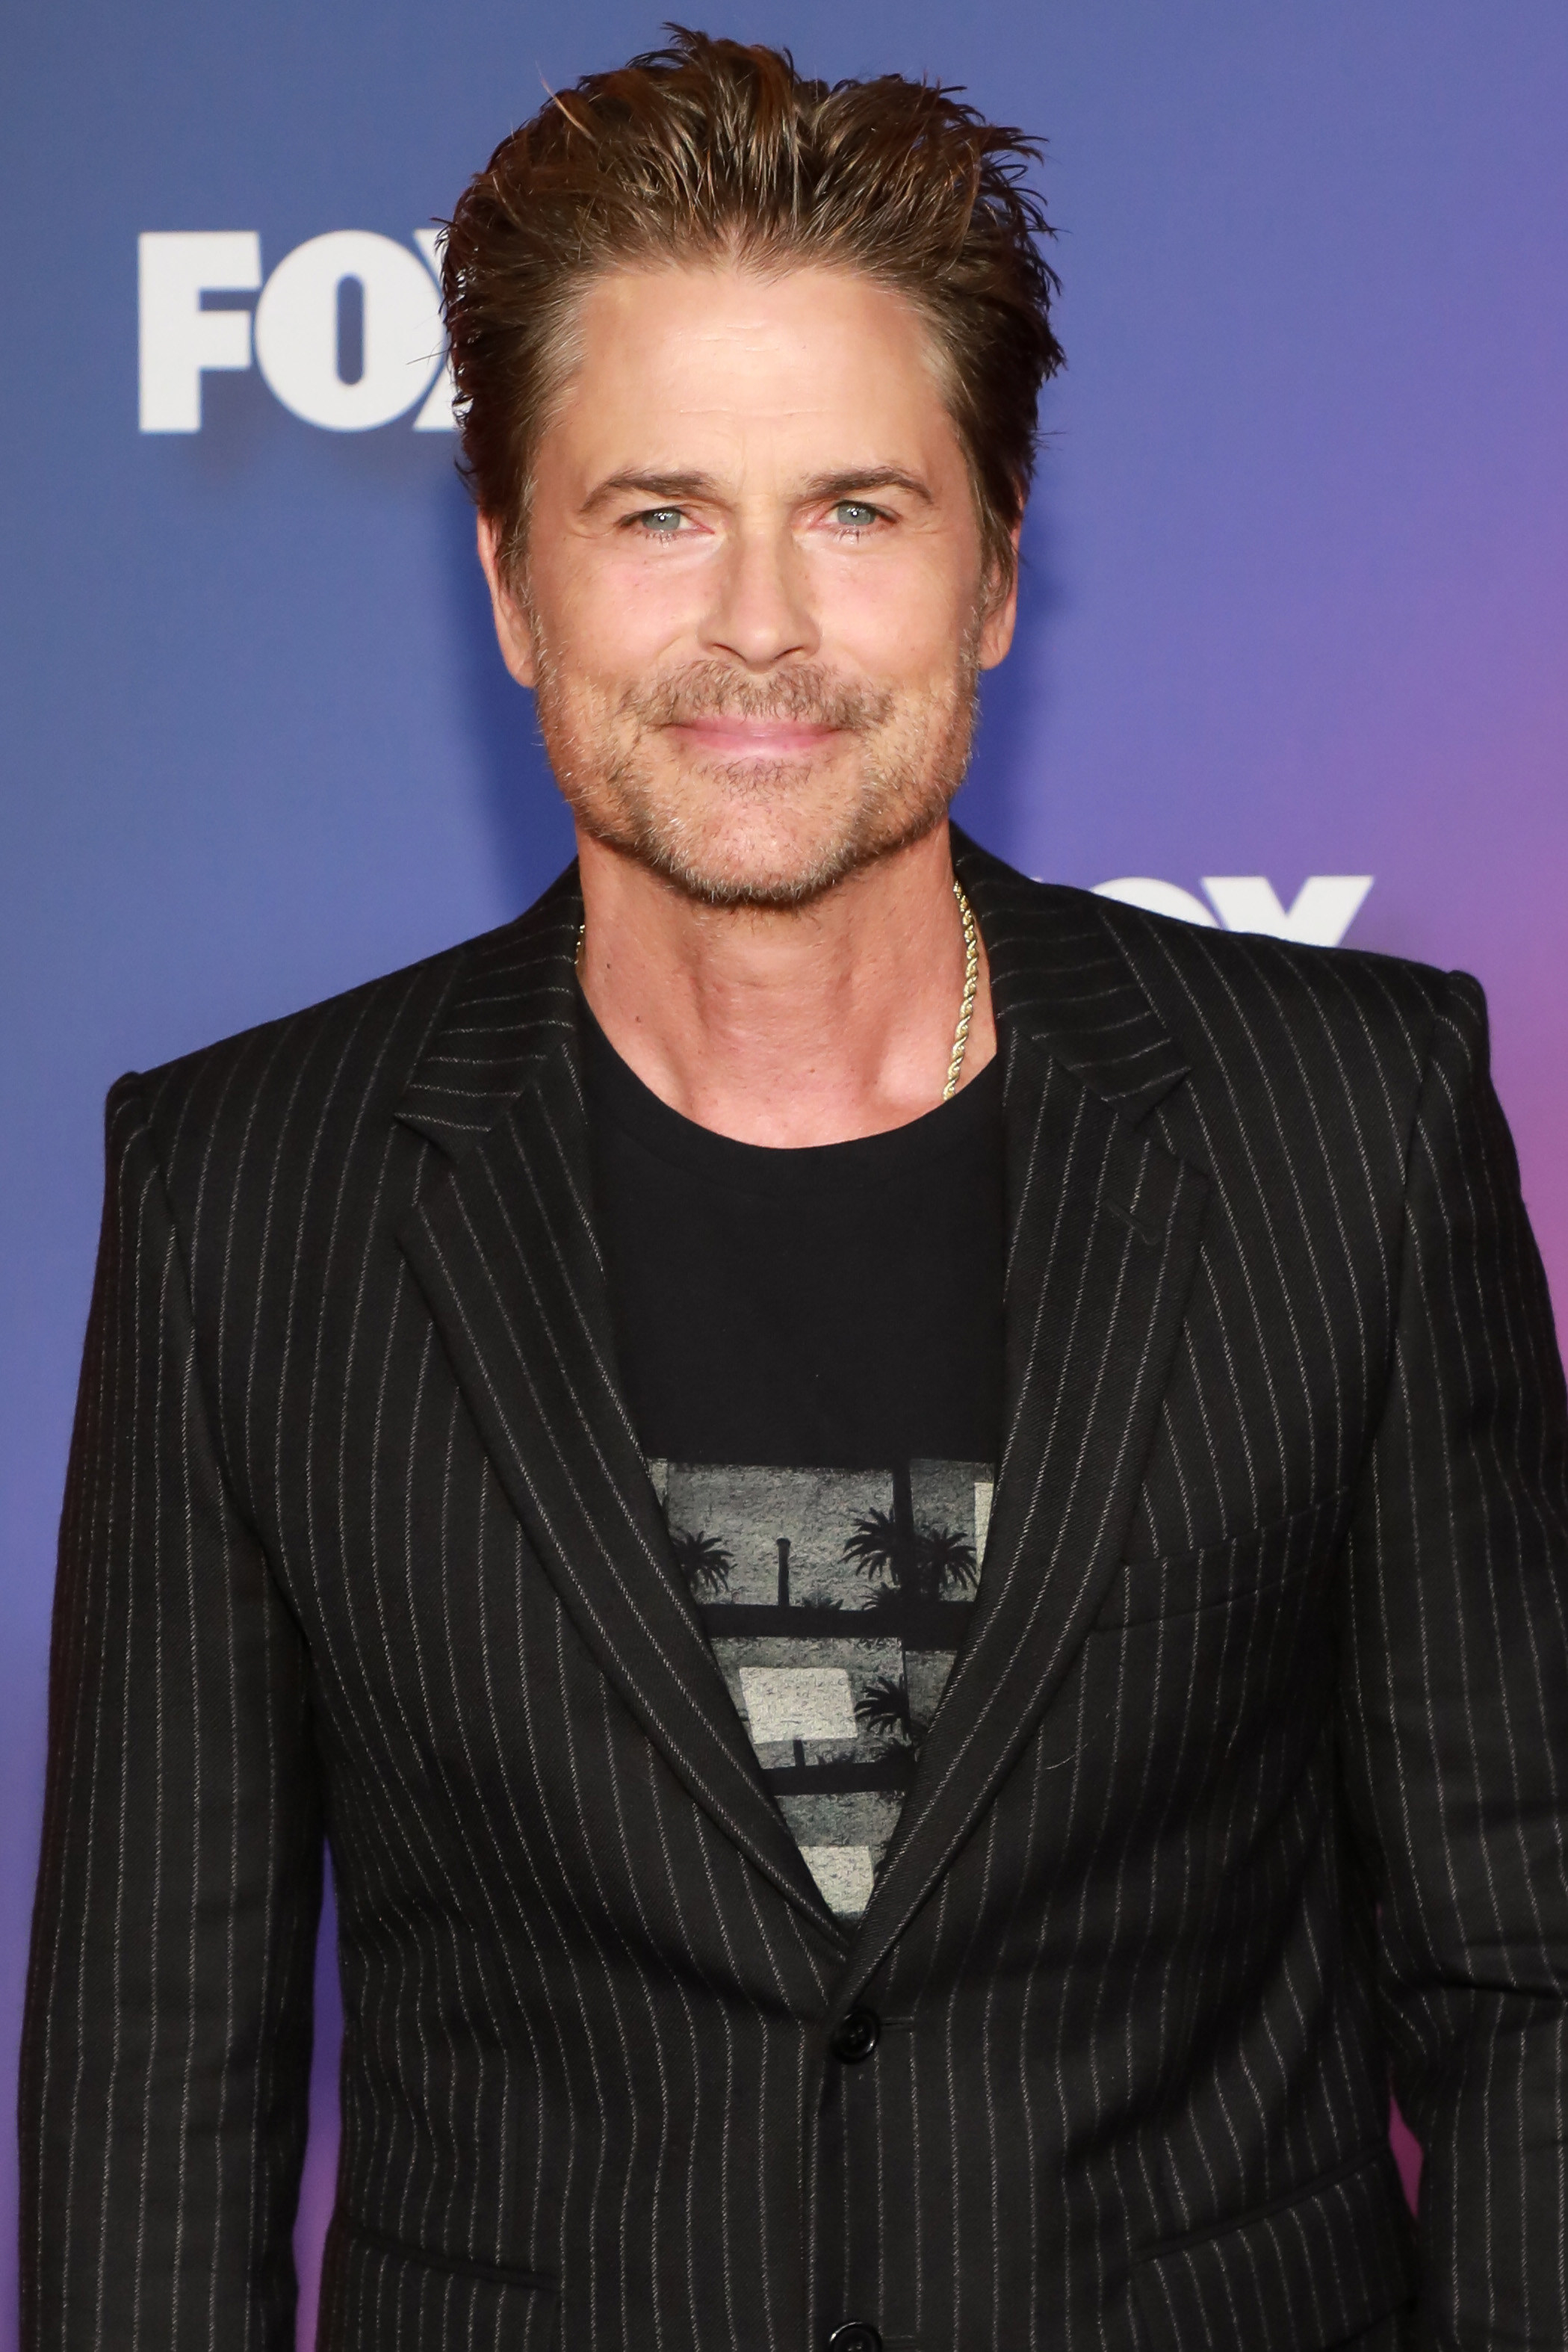 Rob Lowe is seen at a Fox event on May 16, 2022